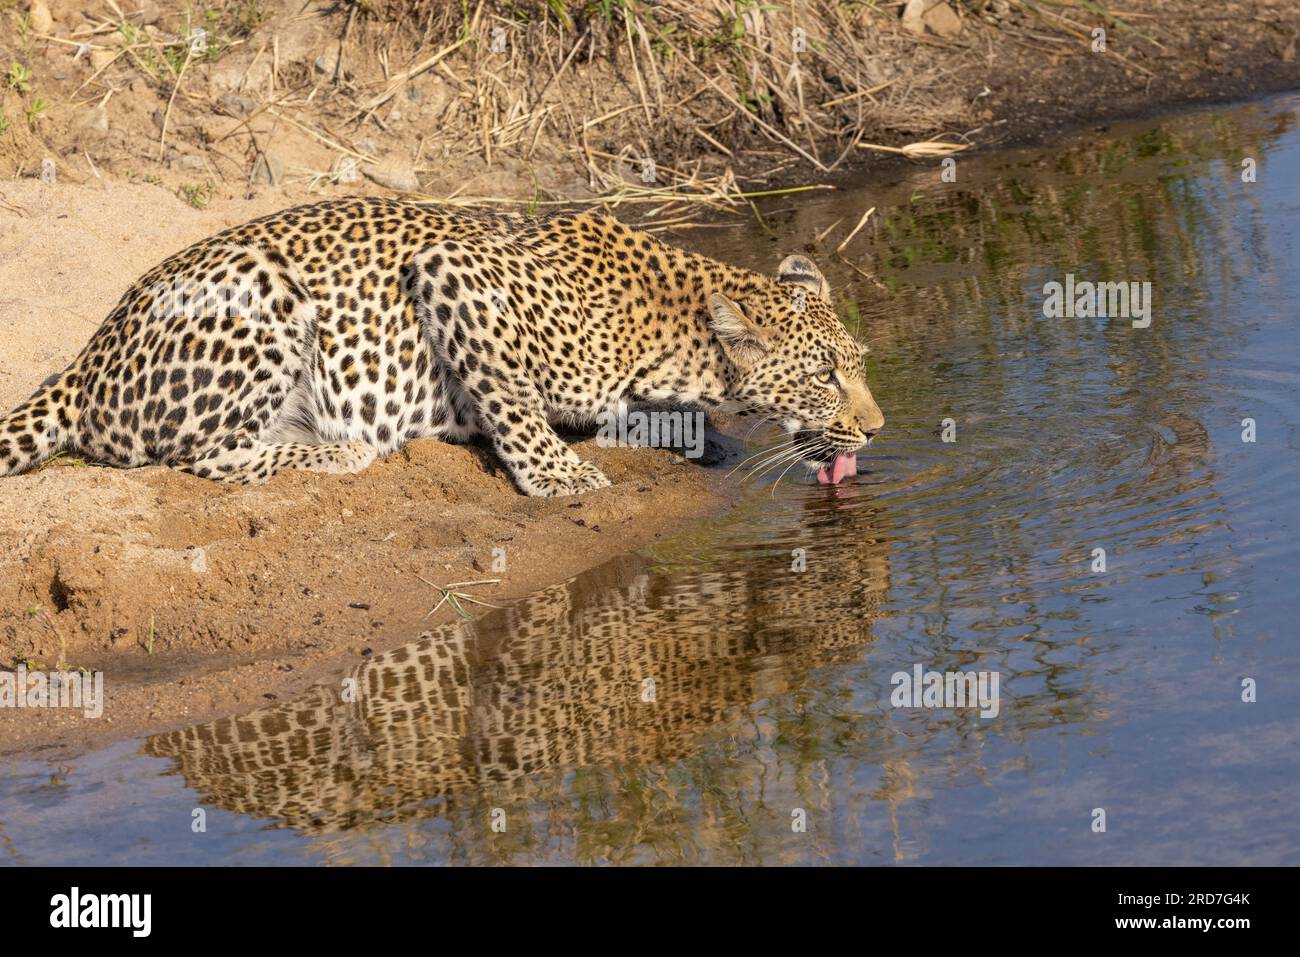 A leopard, also known as Panthera pardus, lapping water at a waterhole in the Kruger National Park in South Africa Stock Photo